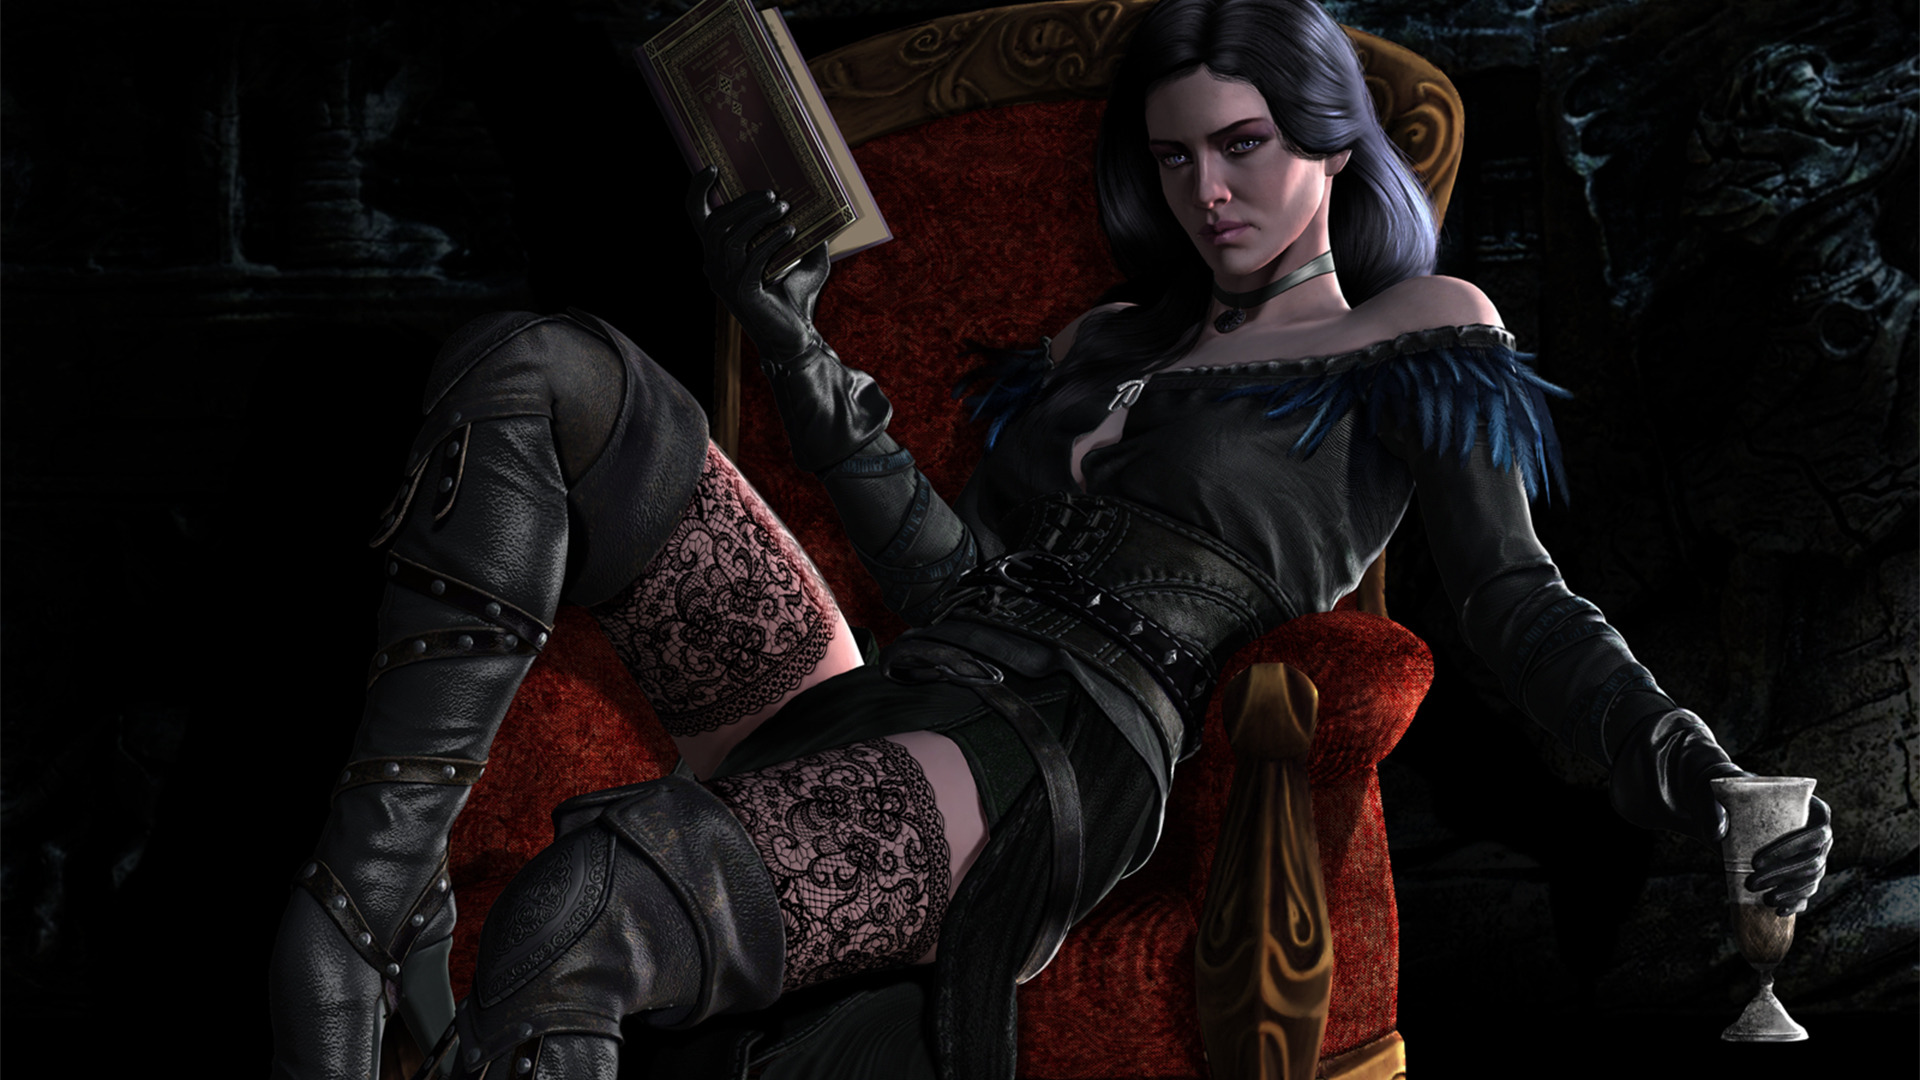 The witcher 3 alternative look for yennefer фото 104